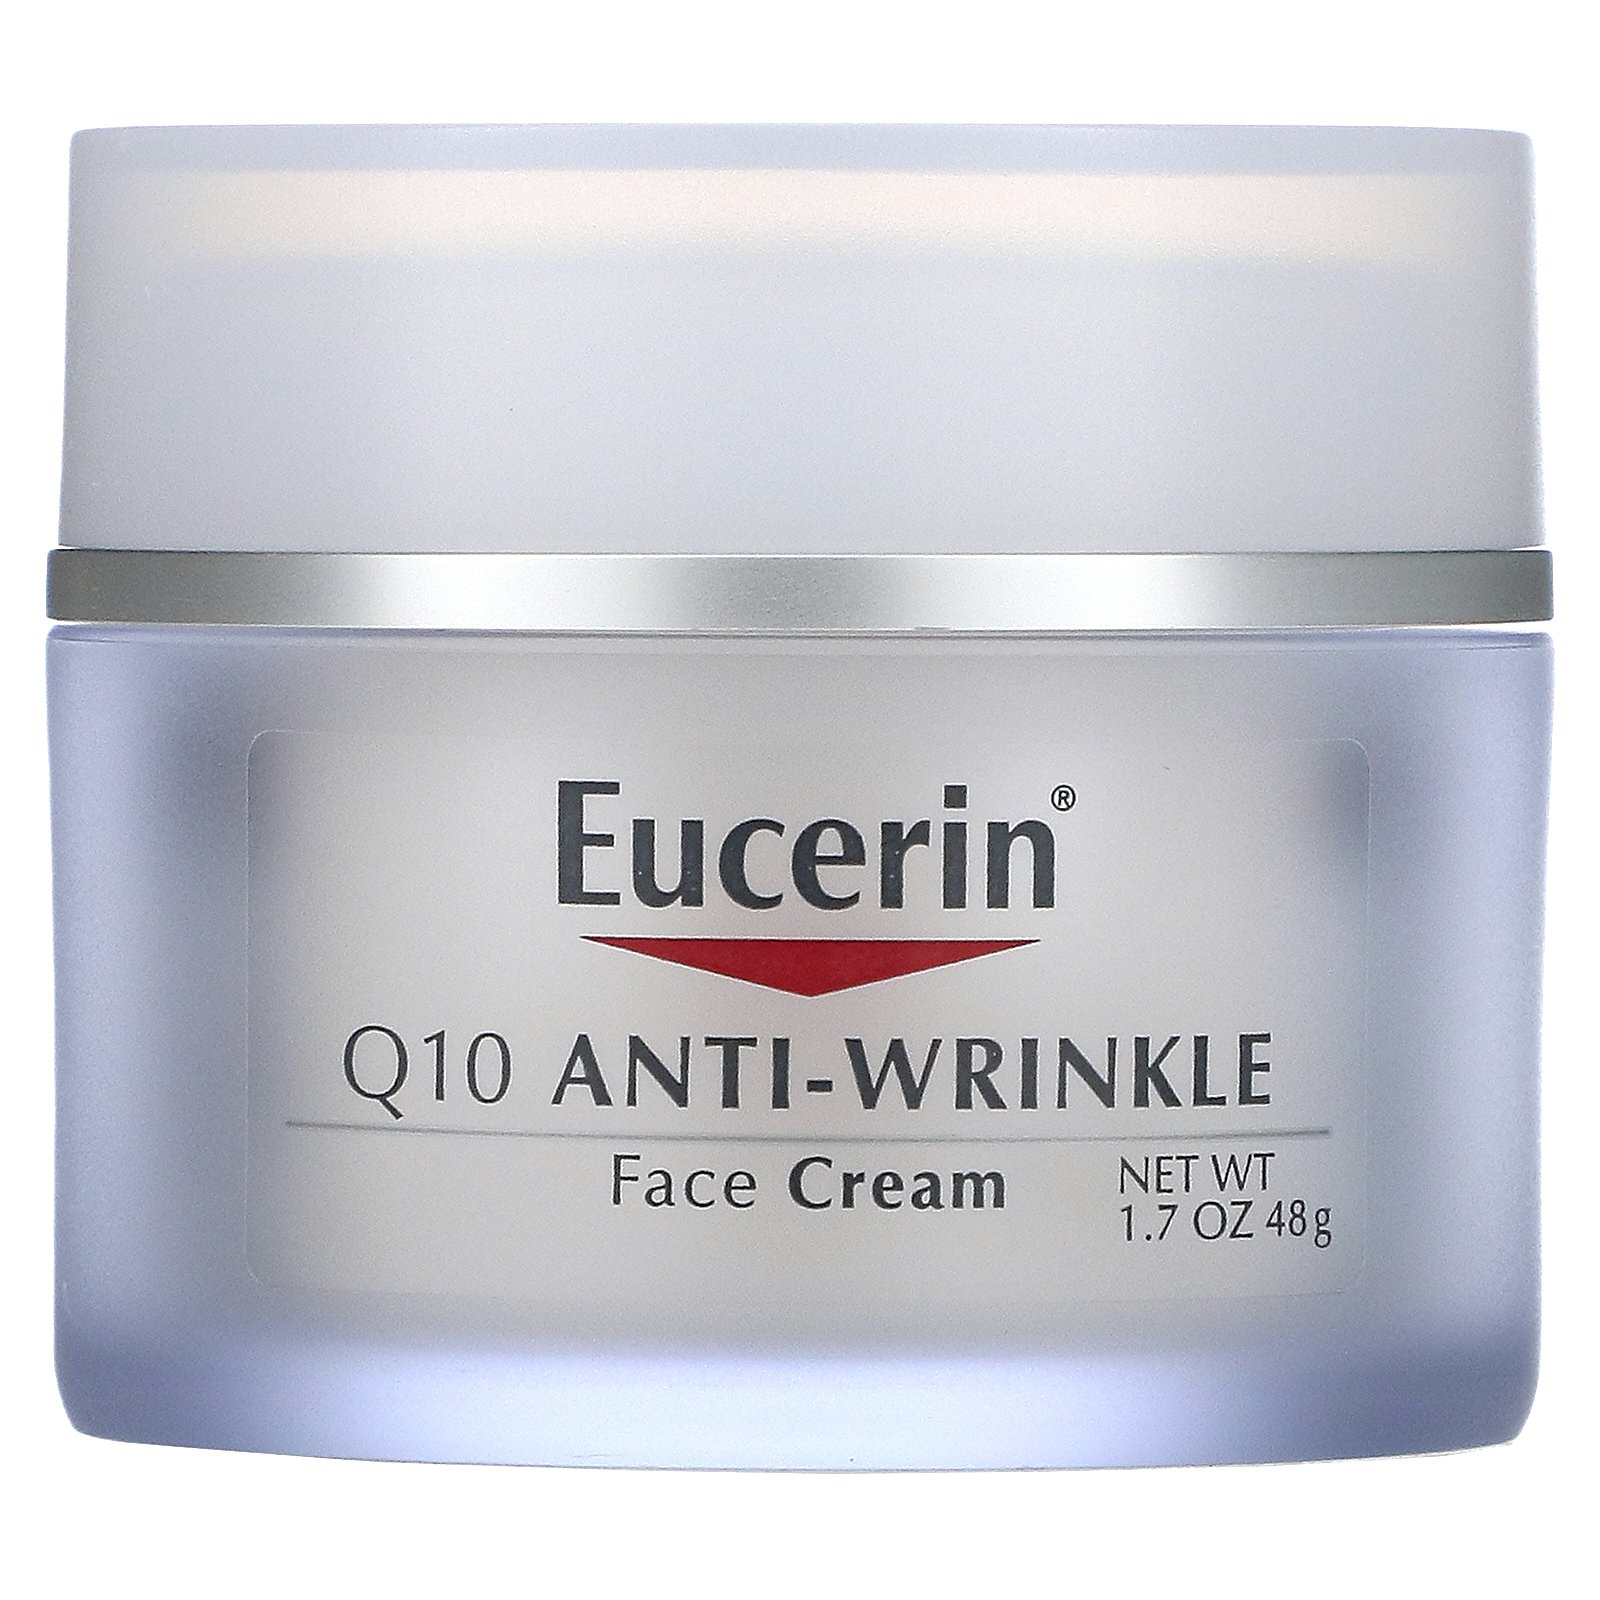 eucerin q10 anti wrinkle face cream review